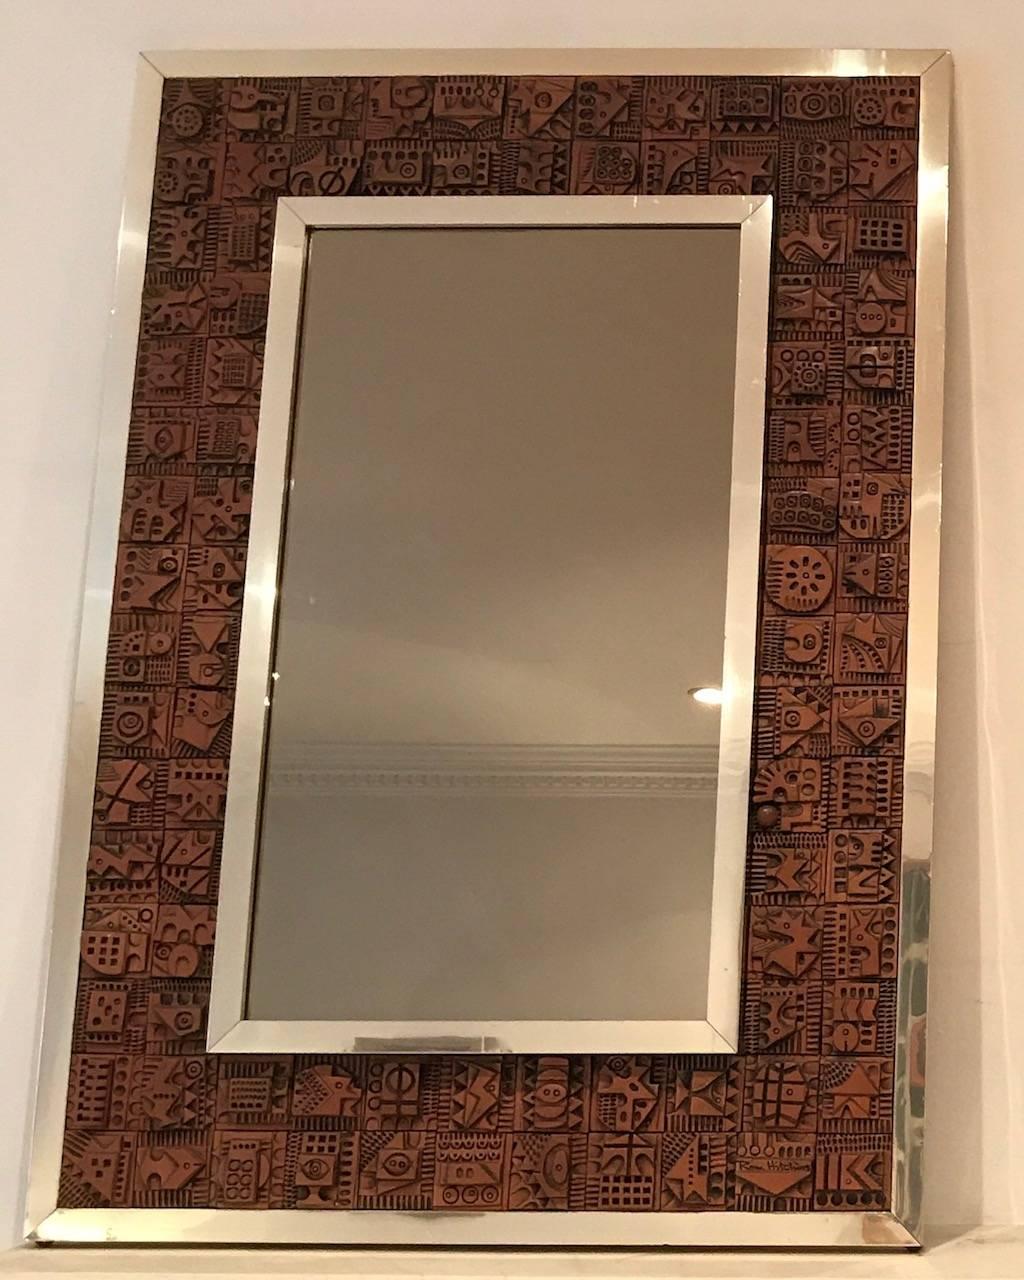 An original 1960s mirror designed by Ron Hitchens. Individual tiles inserted into an aluminium frame. One tile is signed Ron Hitchens. The mirror has a slight bronze tint.